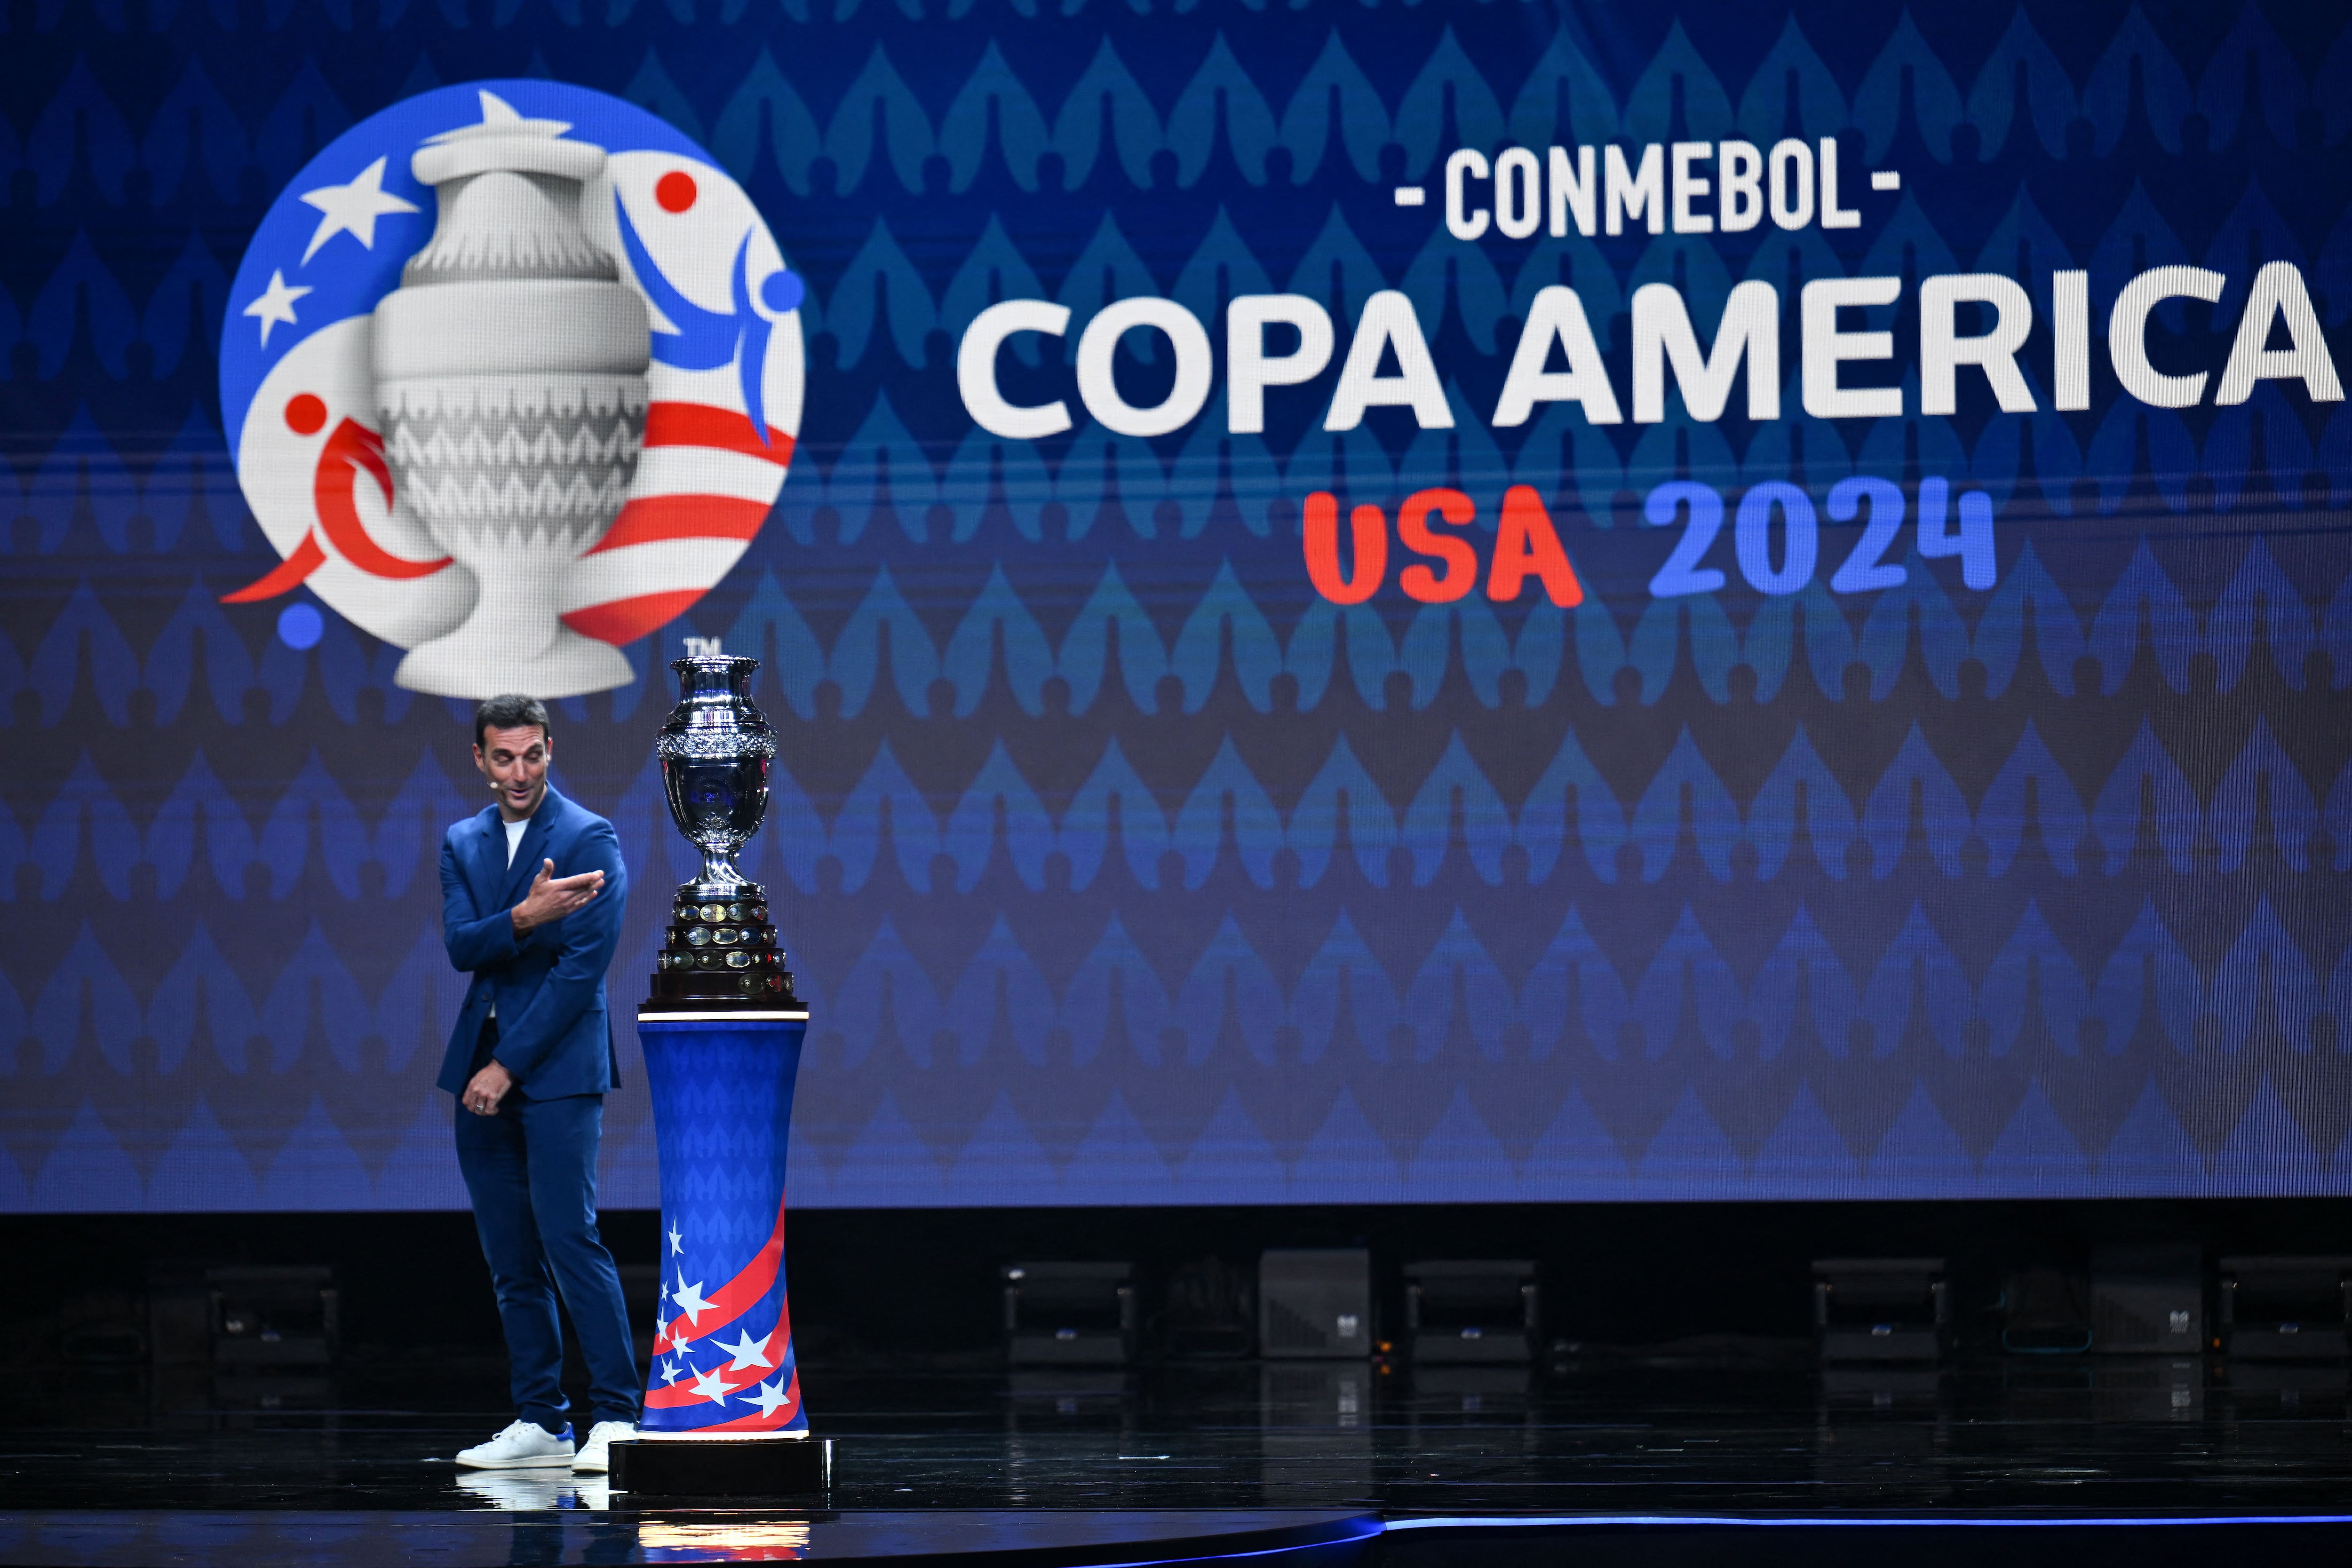 Miami gets the final for 2024 Copa América, one of world soccer's